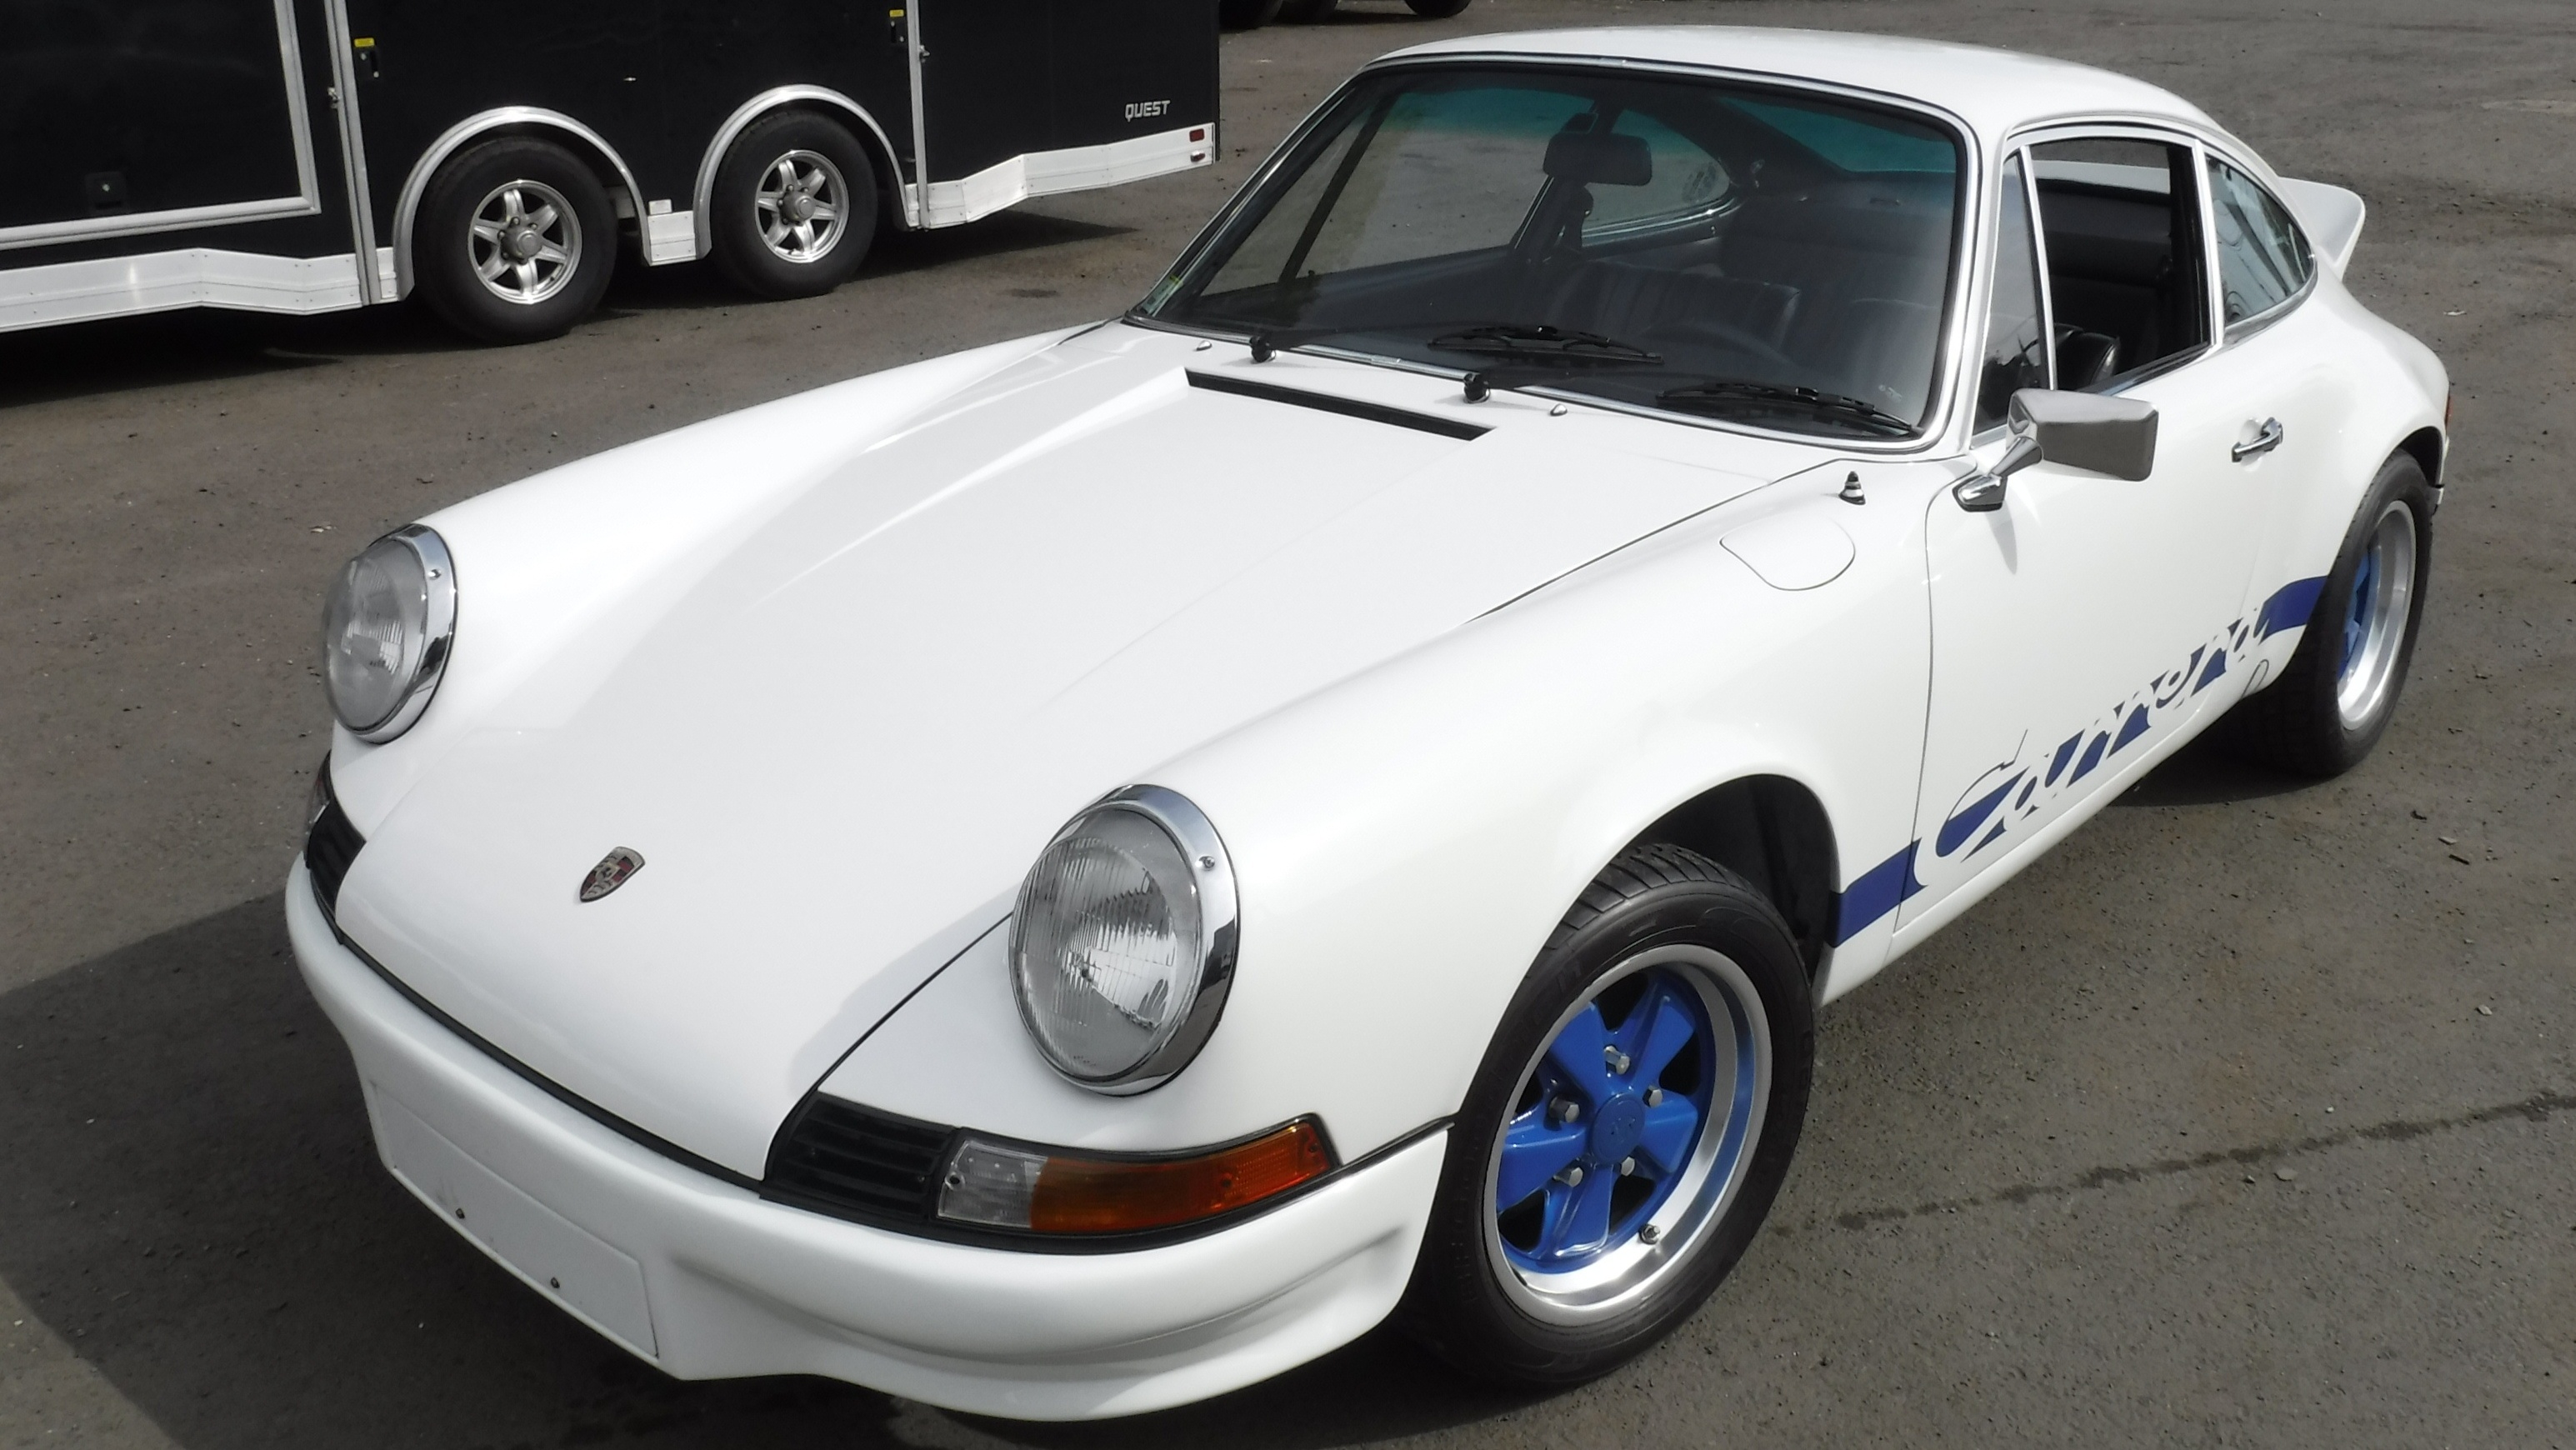 The 911 Carrera RS - an iconic German classic